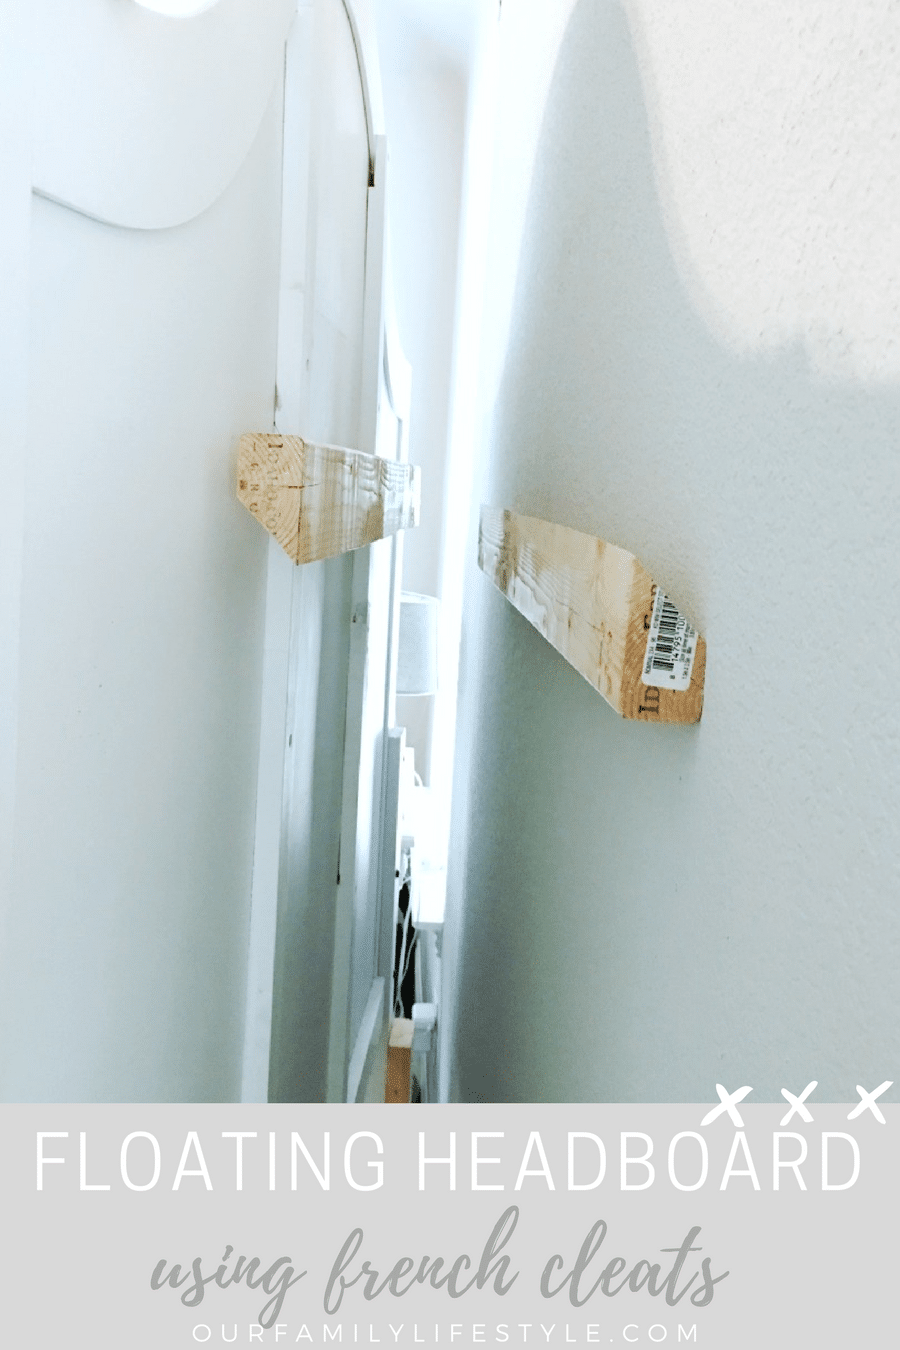 Headboard To The Wall Using French Cleats, Best Way To Fix Headboard Wall